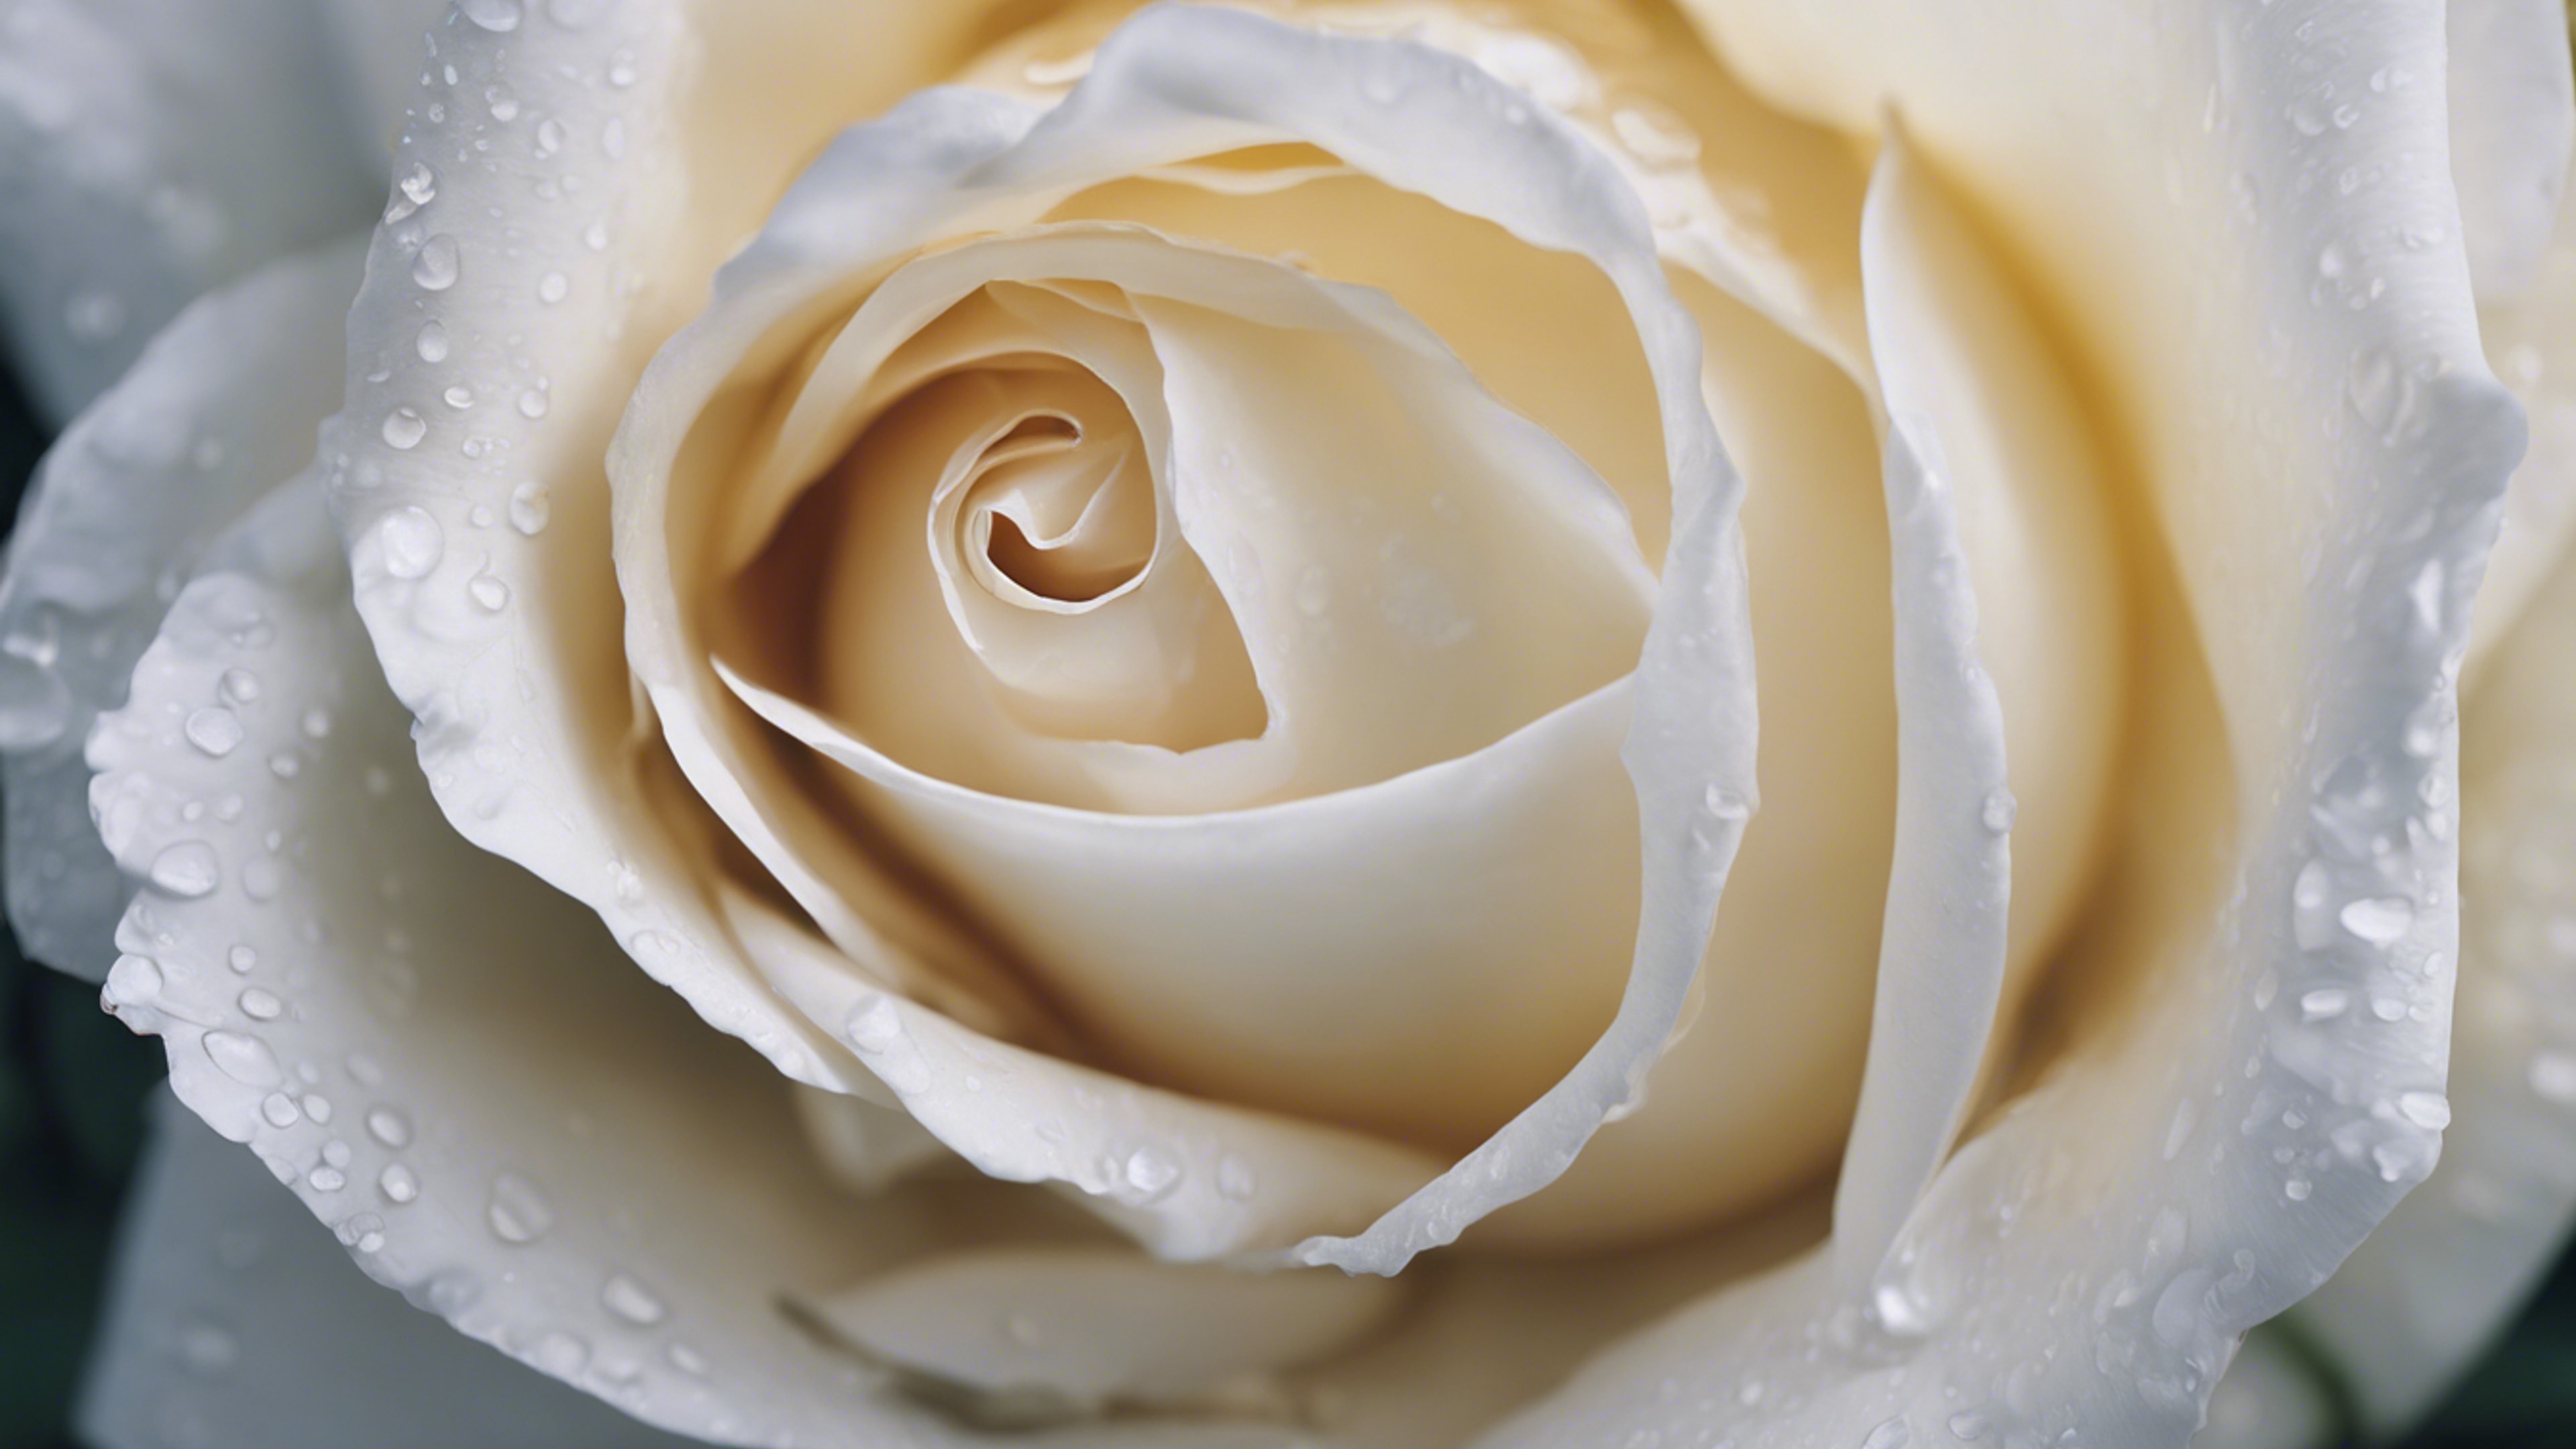 Zoomed view of the velvety petals of a white rose. Tapeta[9ebd1bf4e1a74c36ba13]